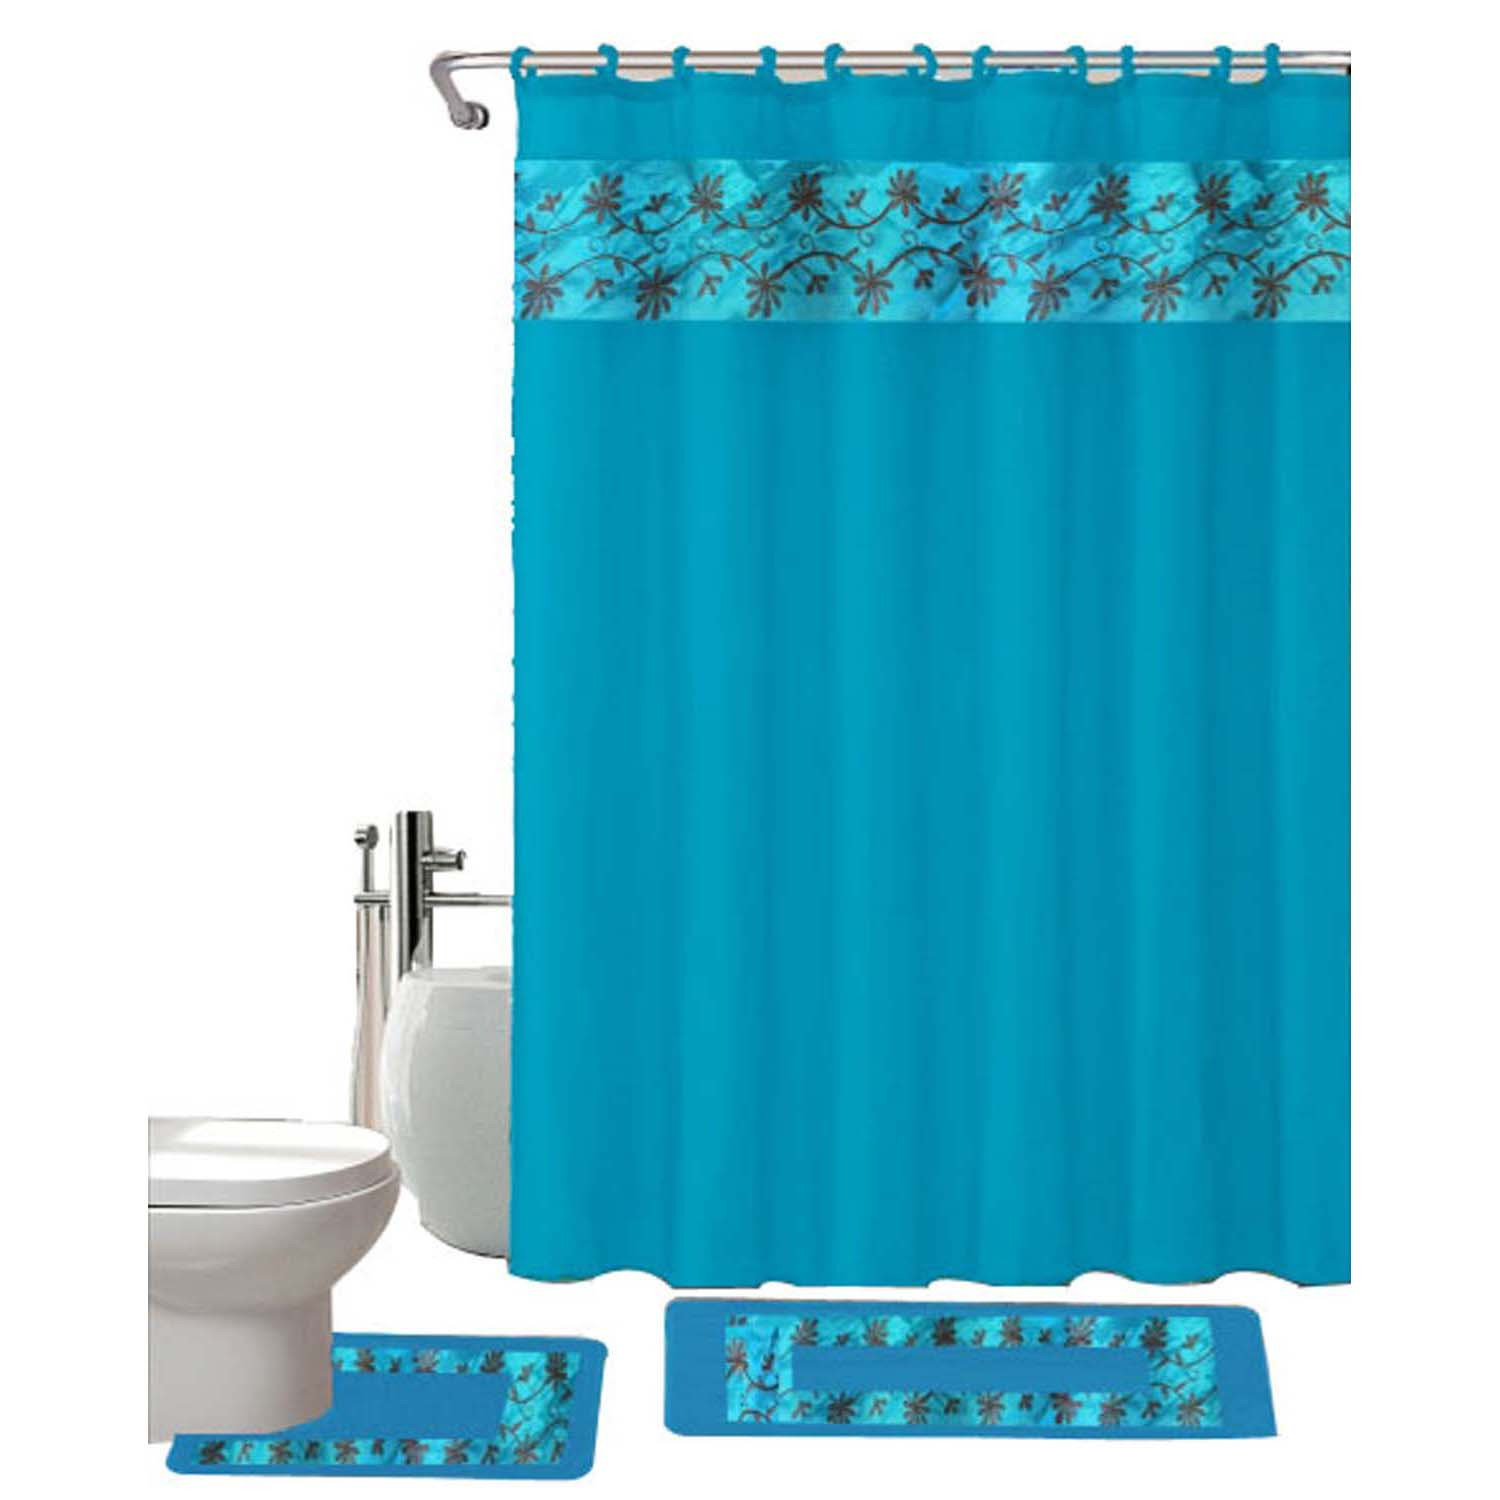 Thea 15 Piece Shower Curtain Set Turquoise, Turquoise Shower Curtain Set